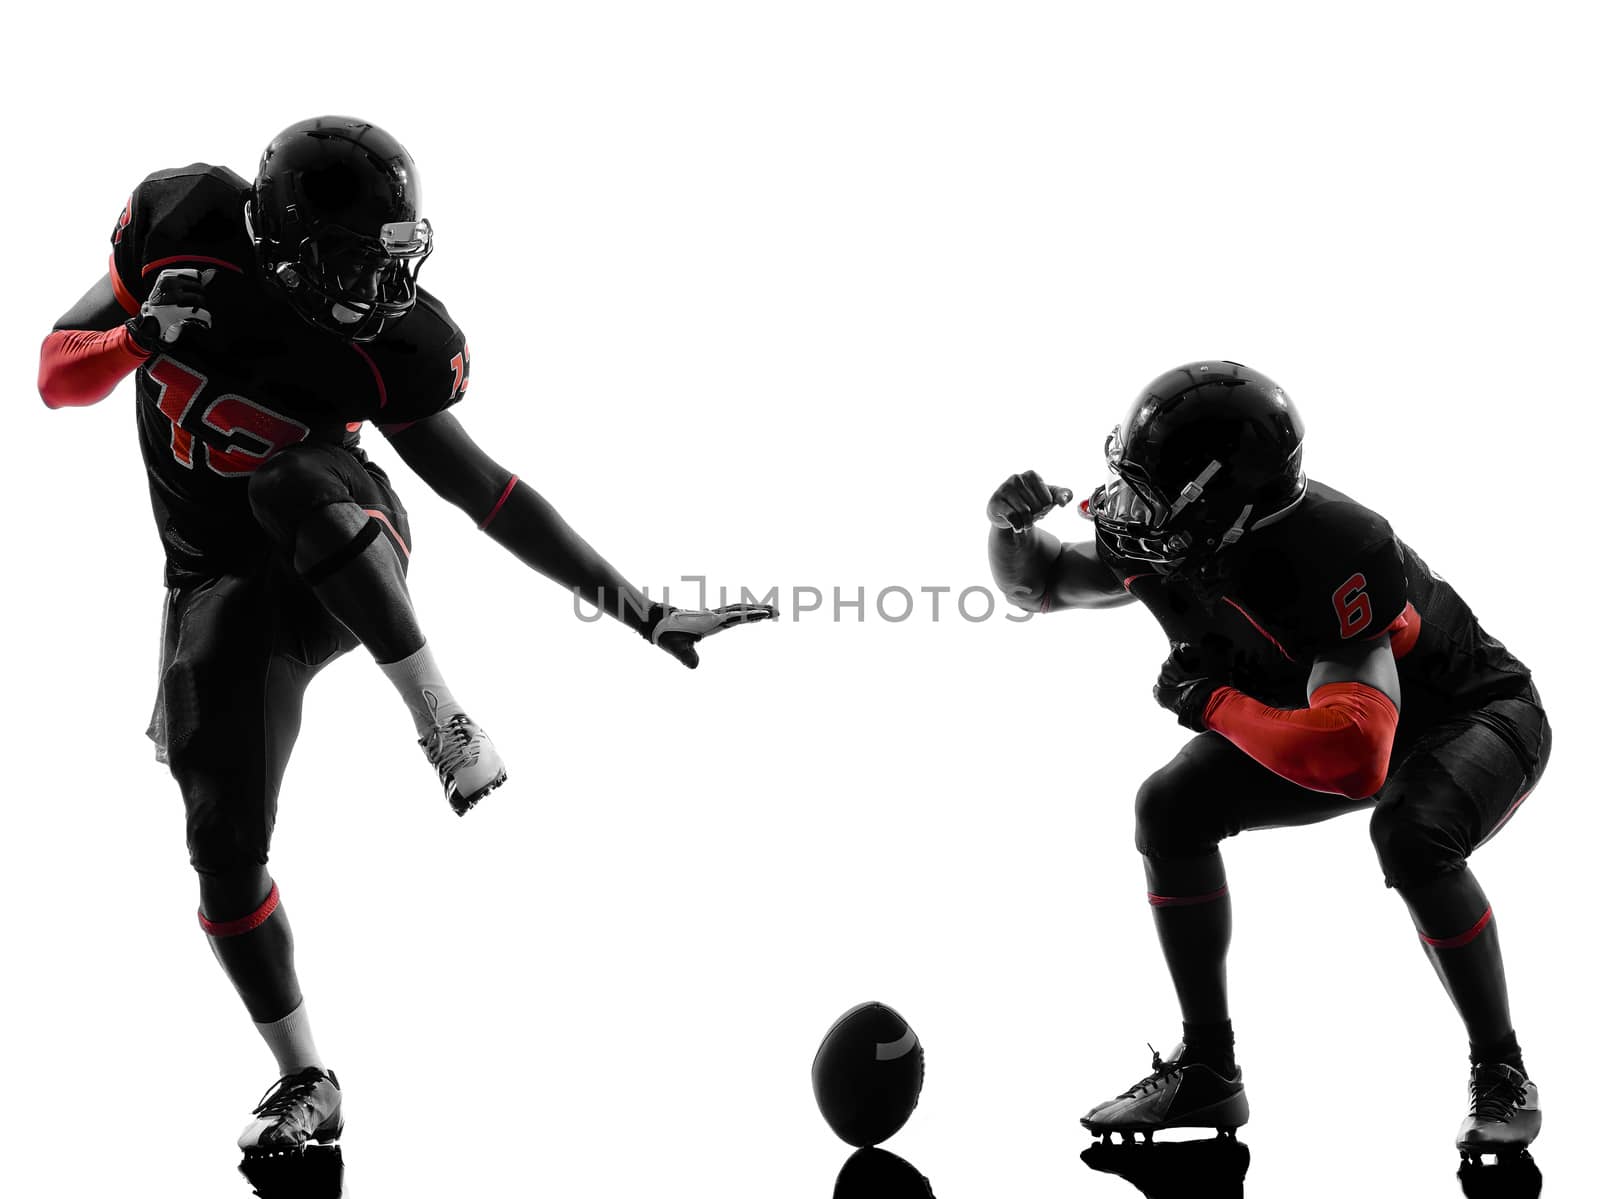 two american football players in touchdown celebration silhouette shadow on white background